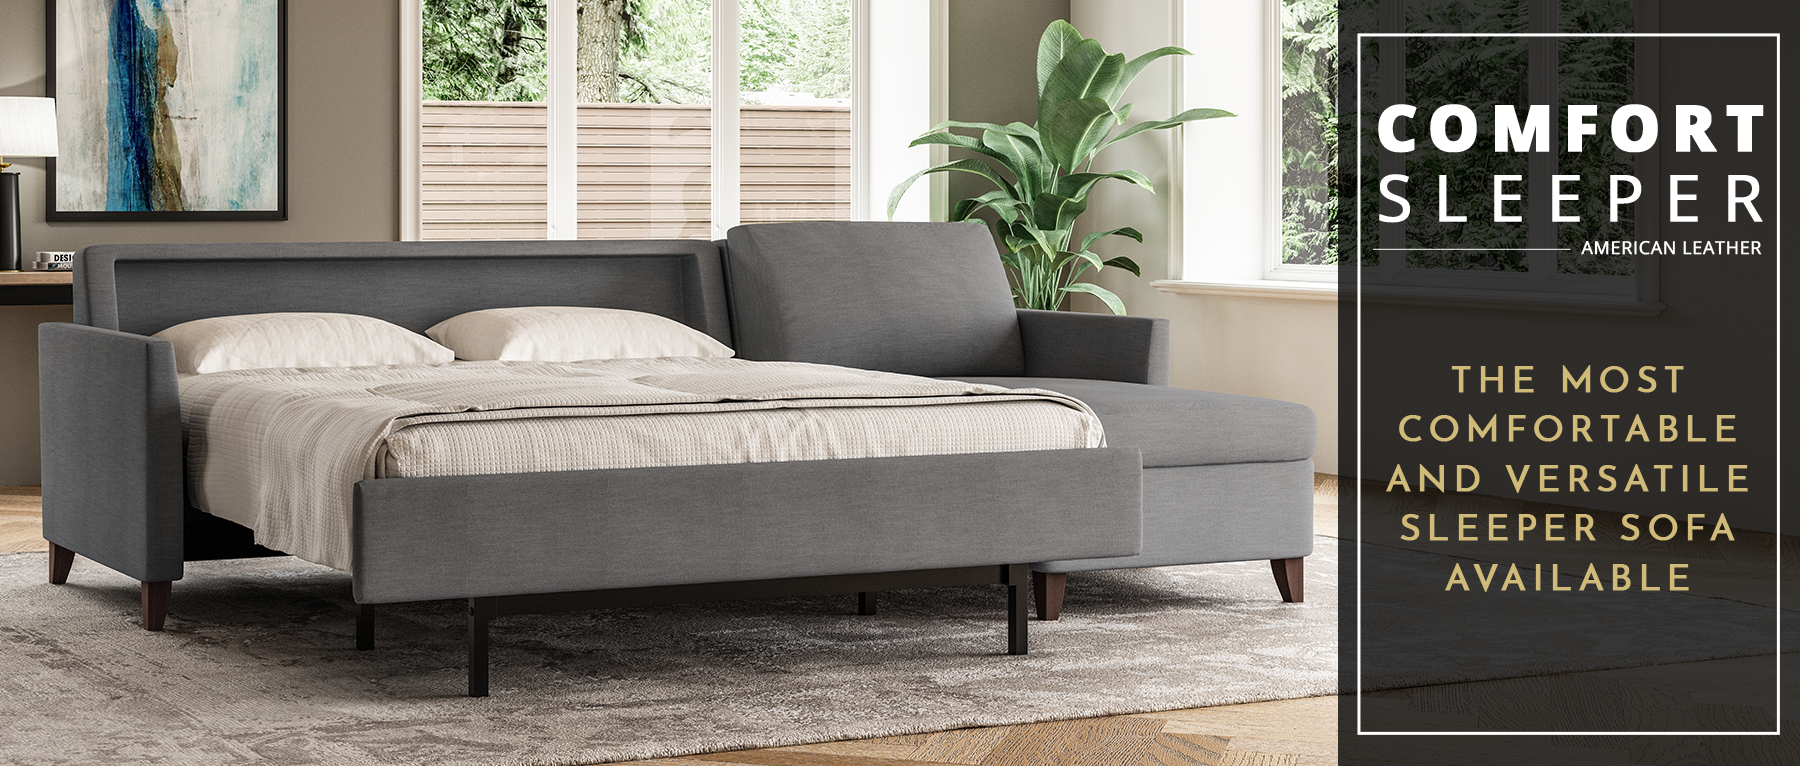 The Comfort Sleeper By American Leather, American Leather Sleepers